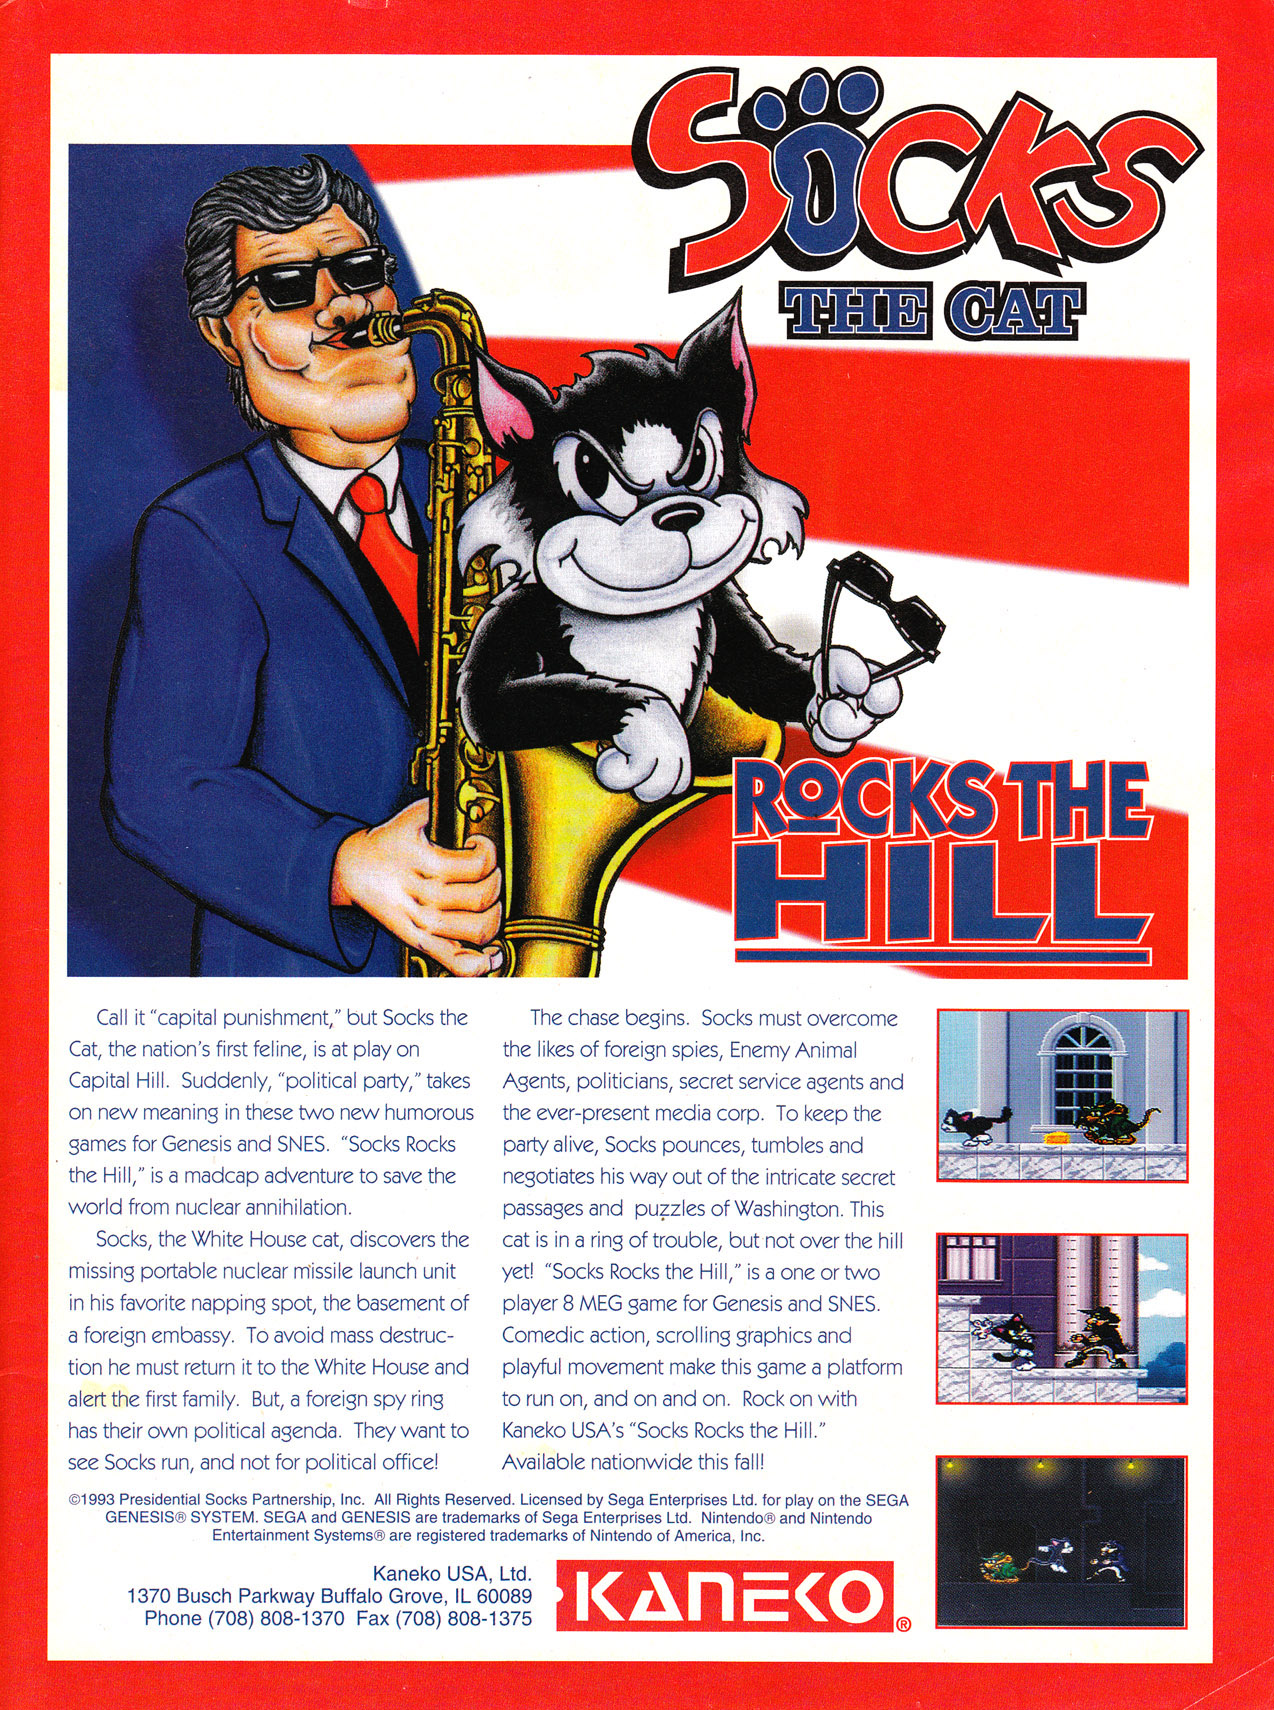 Not the type of pussy we tend to associate with the Clinton administration. Socks the Cat Rocks the Hill was an ultimately unreleased video game starring Socks, the Clinton family […]